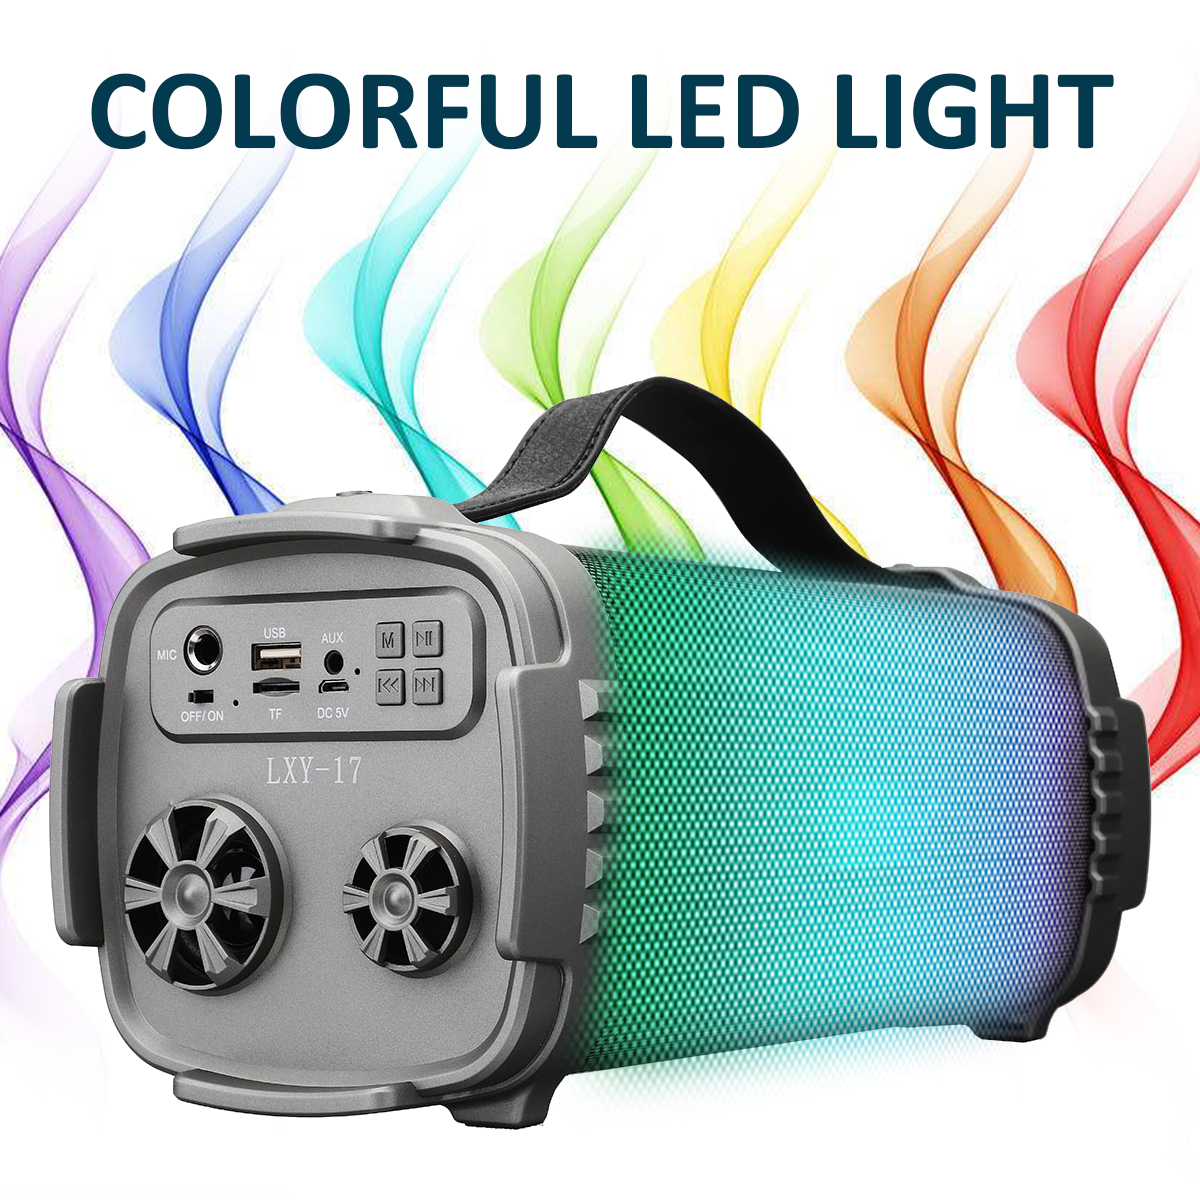 Portable-Wireless-bluetooth-Speaker-Colorful-LED-Light-Outdoor-Stereo-Bass-FM-Radio-TF-Card-Speaker-1388743-4